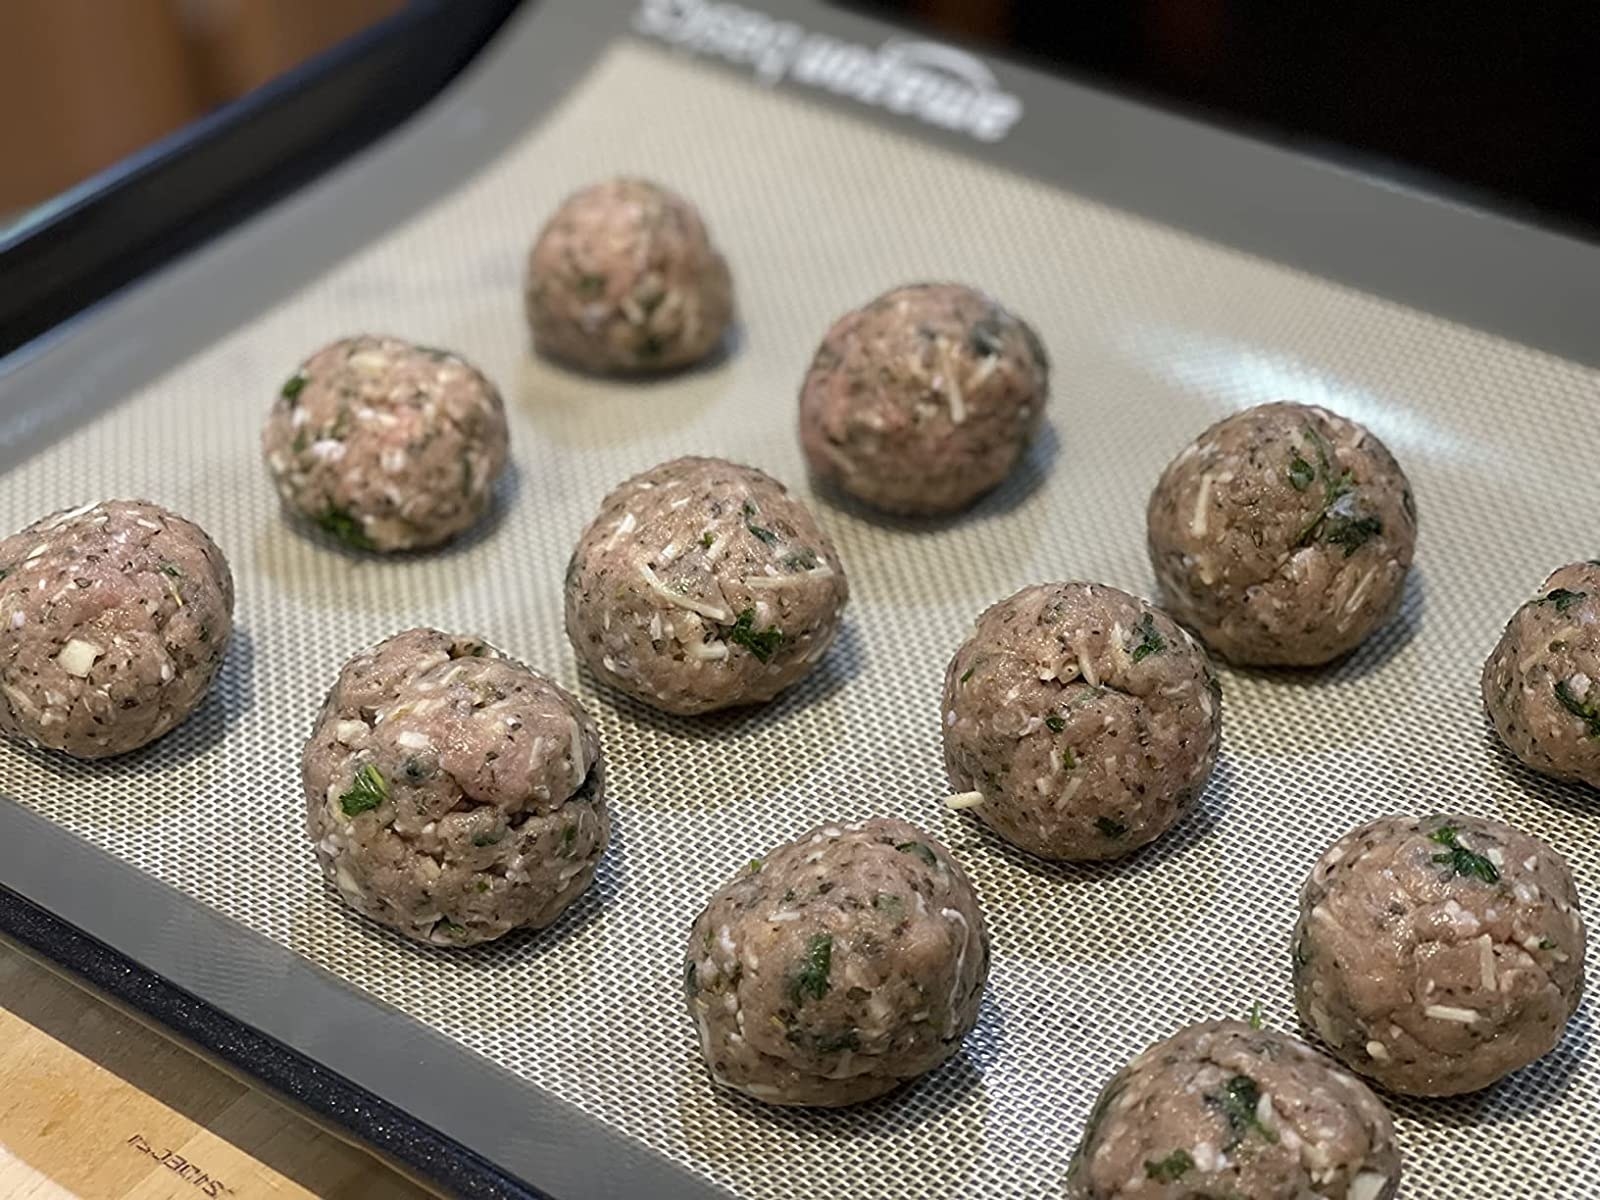 Reviewer image of meatballs on baking sheet lined with silicone mat